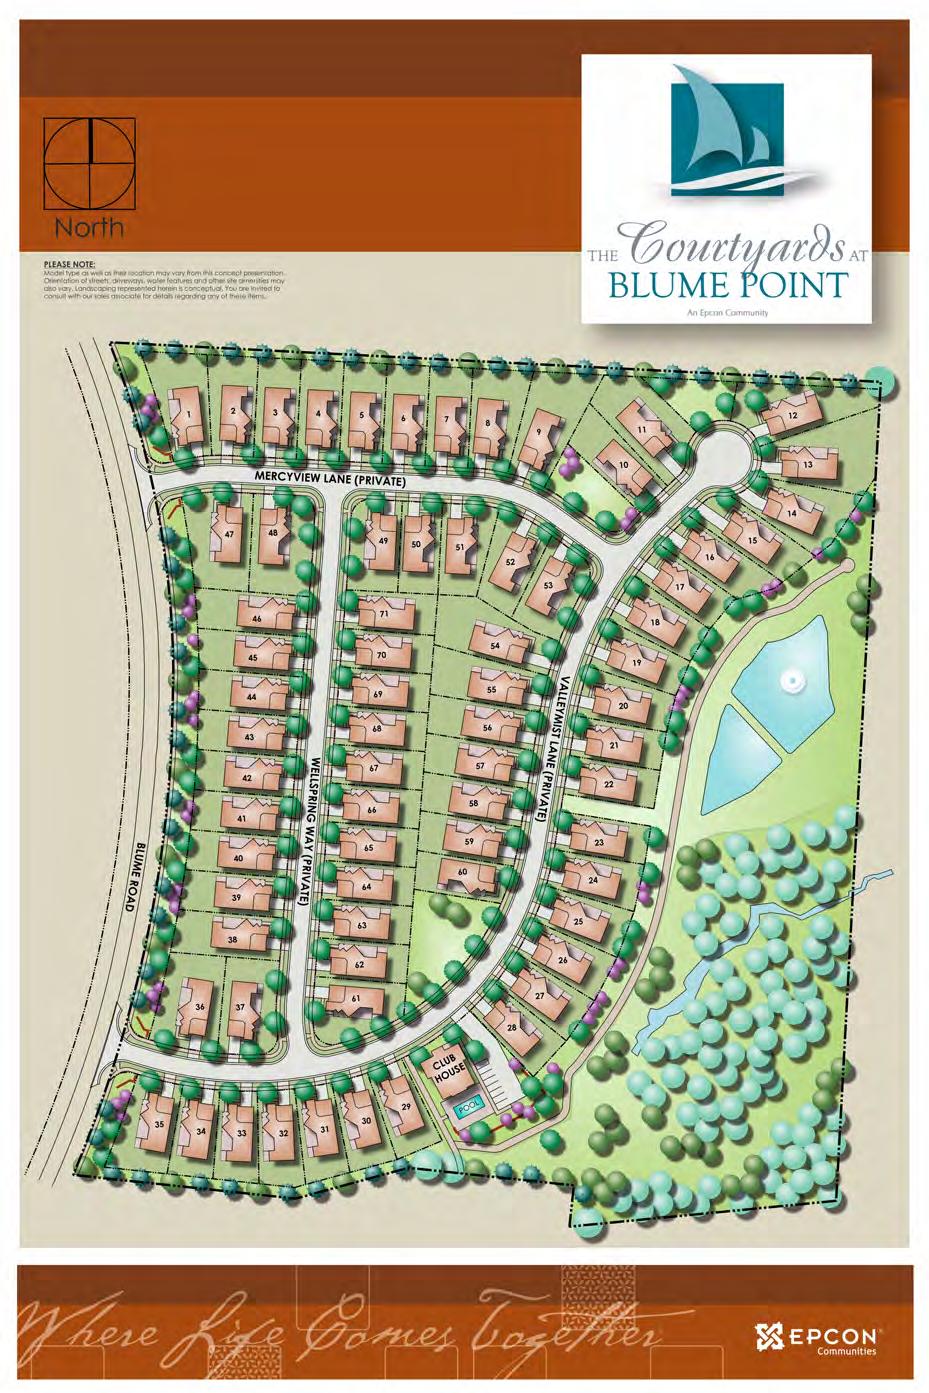 Community NOTE: This rendered community plan is an approximate representation of homes, streets, walks and other elements of the community.